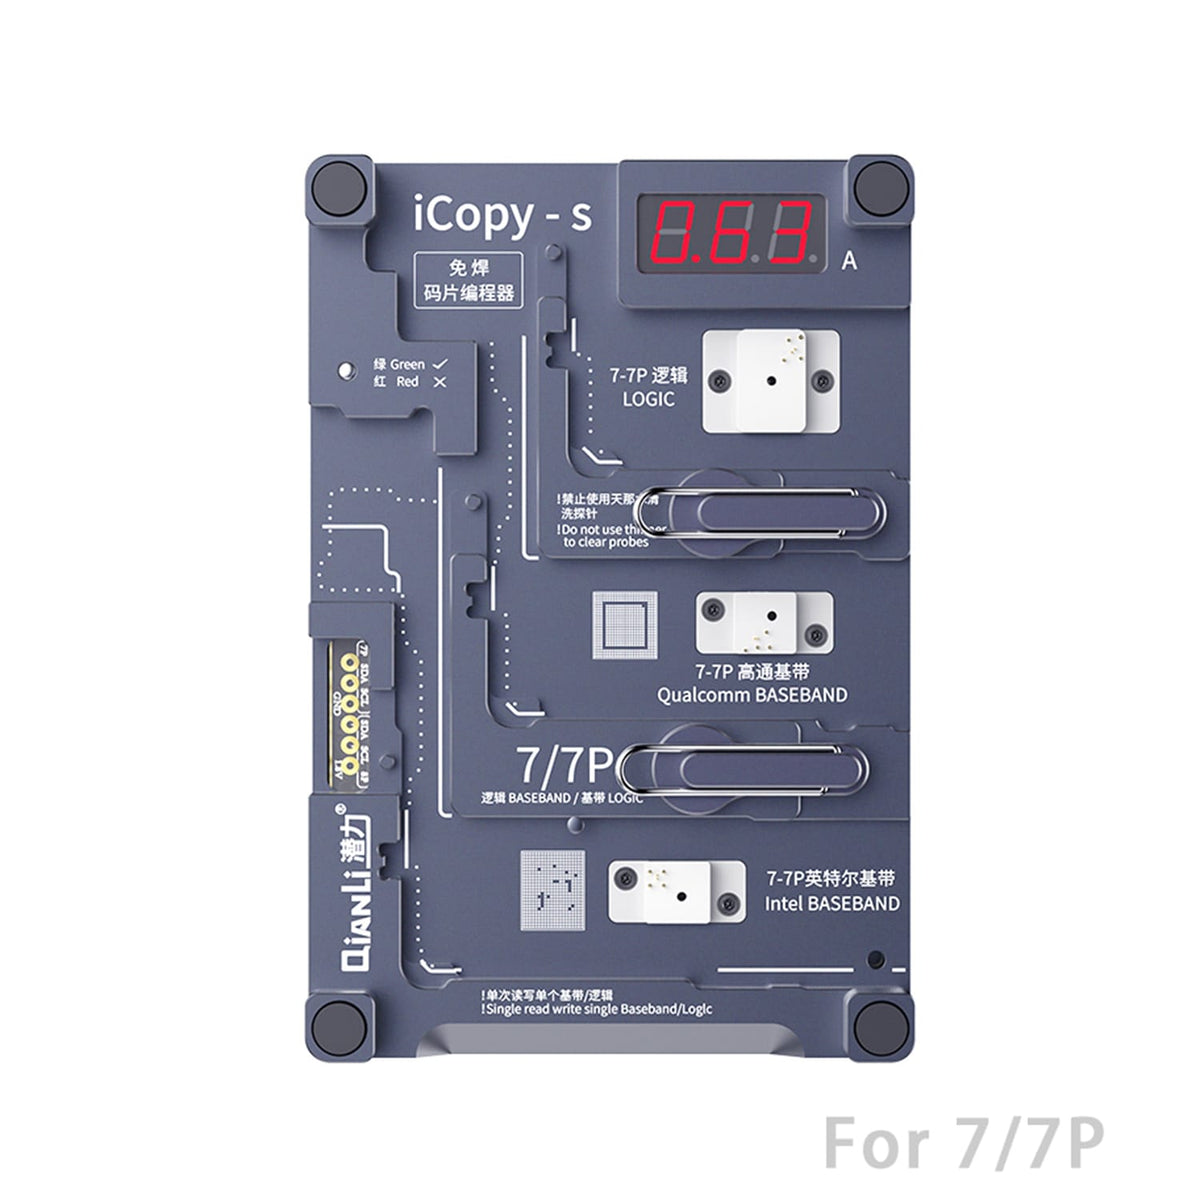 TOOLPLUS QIANLI ICOPY-S DOUBLE - SIDED 4IN1 LOGIC BASEBAND EEPROM CHIP NON-REMOVAL FOR IPHONE 7/7P/8/8P